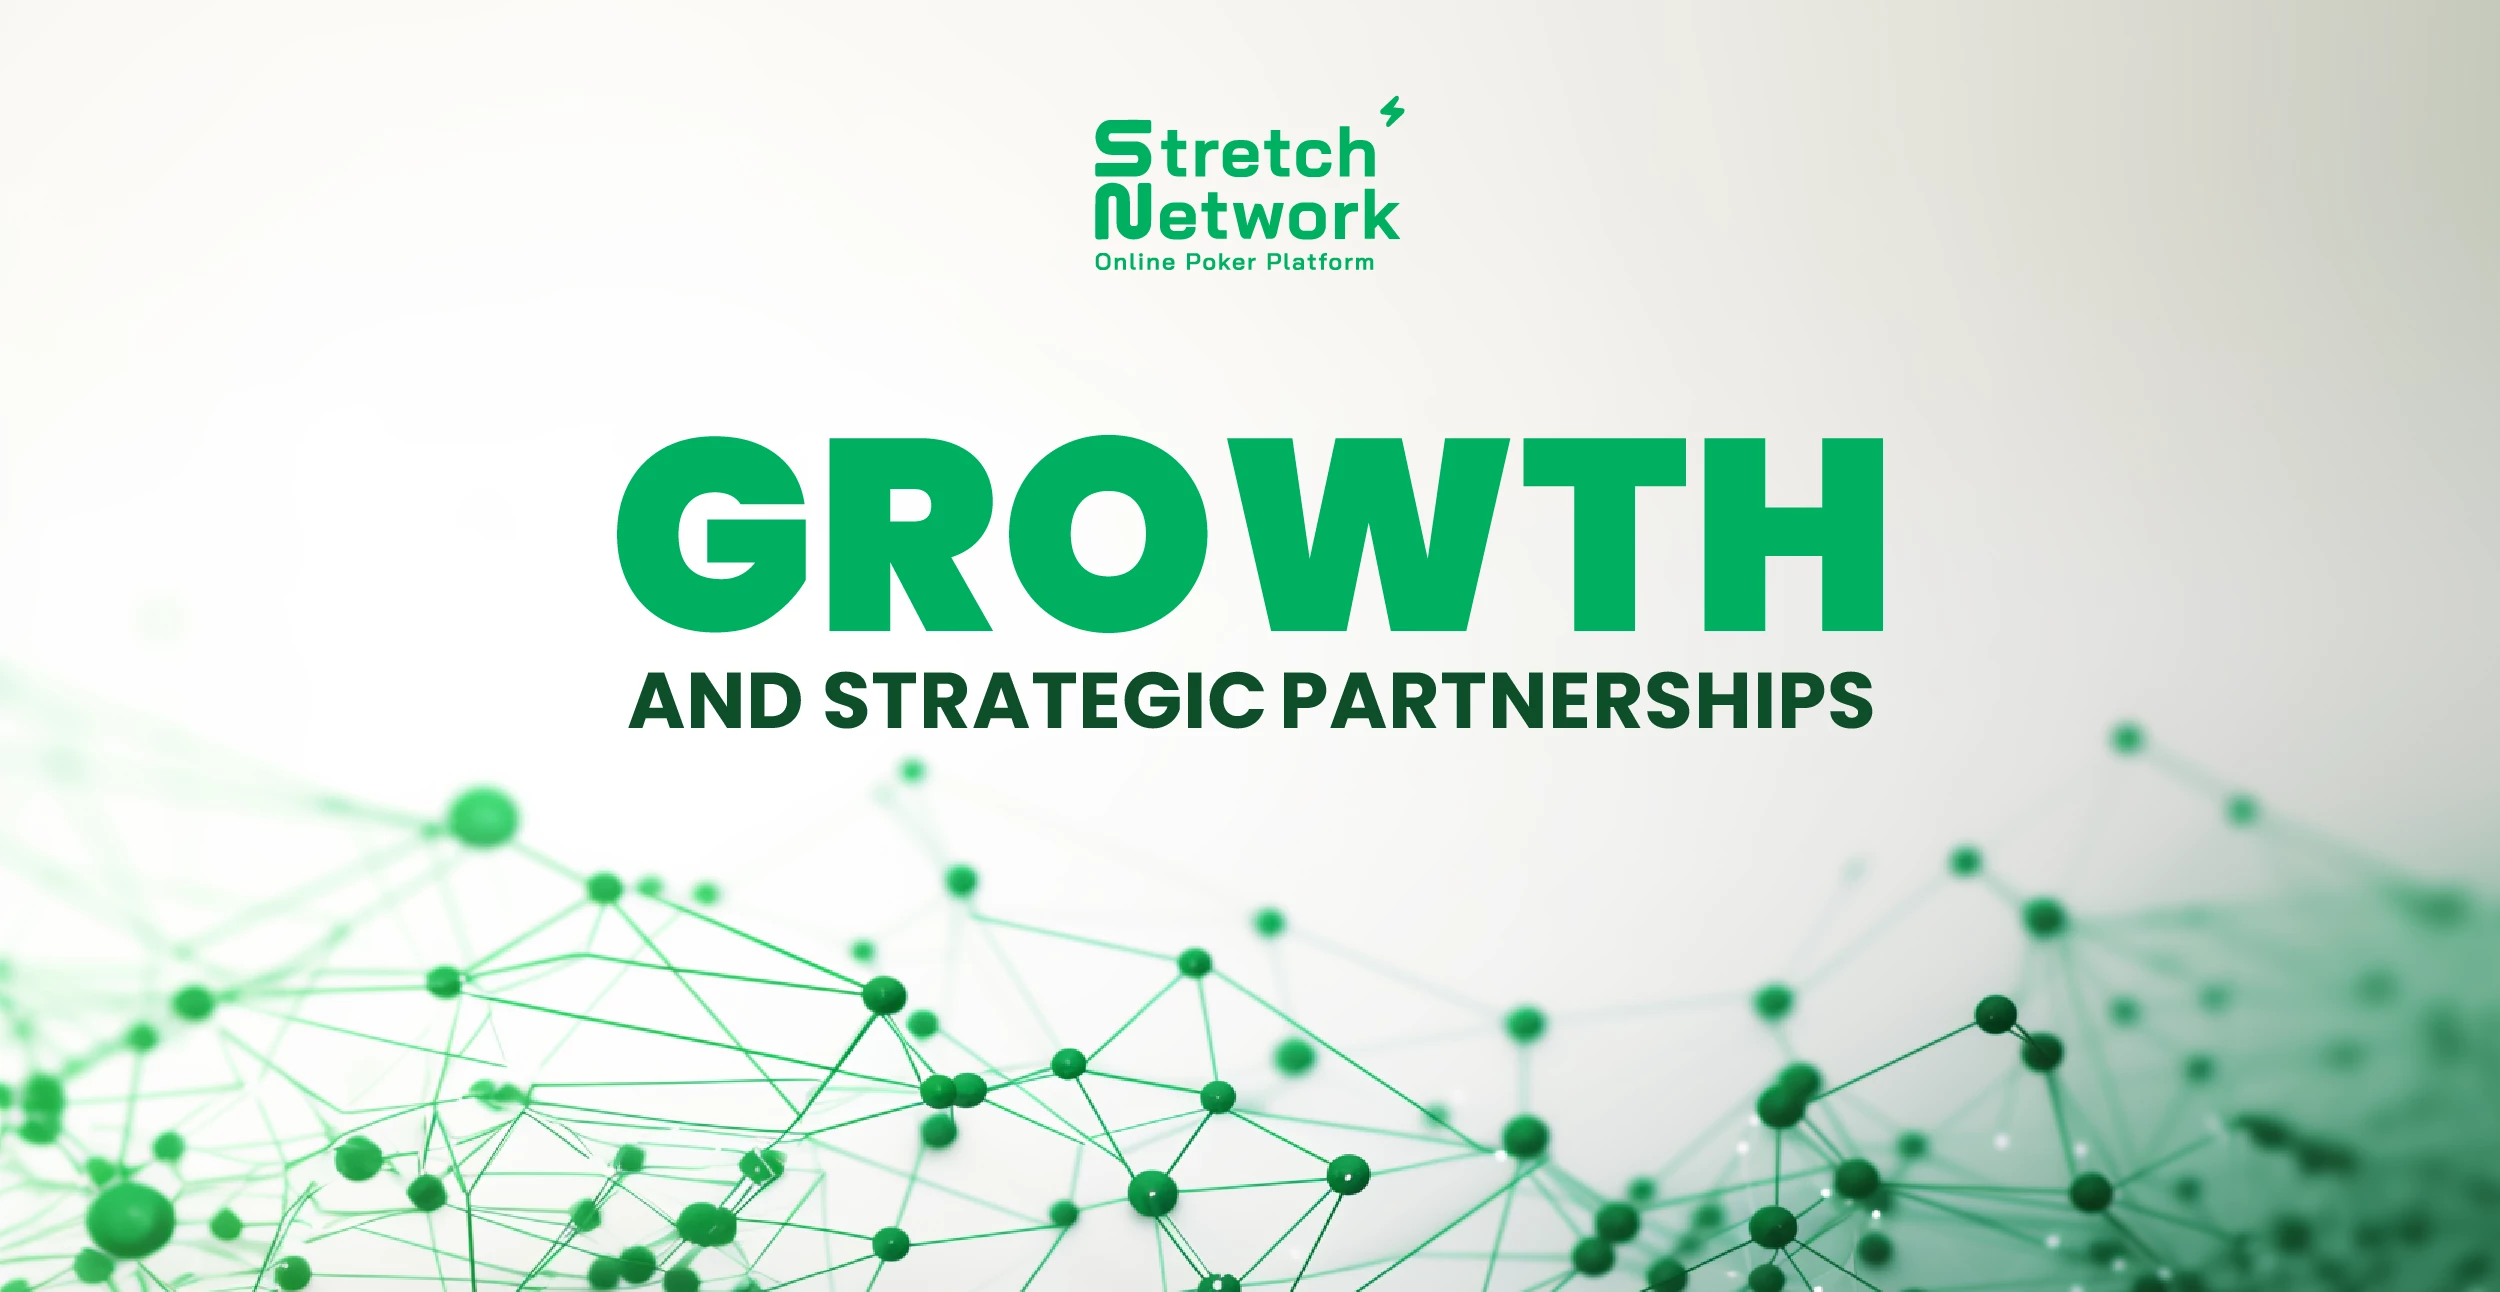 Global Growth and Strategic Partnerships